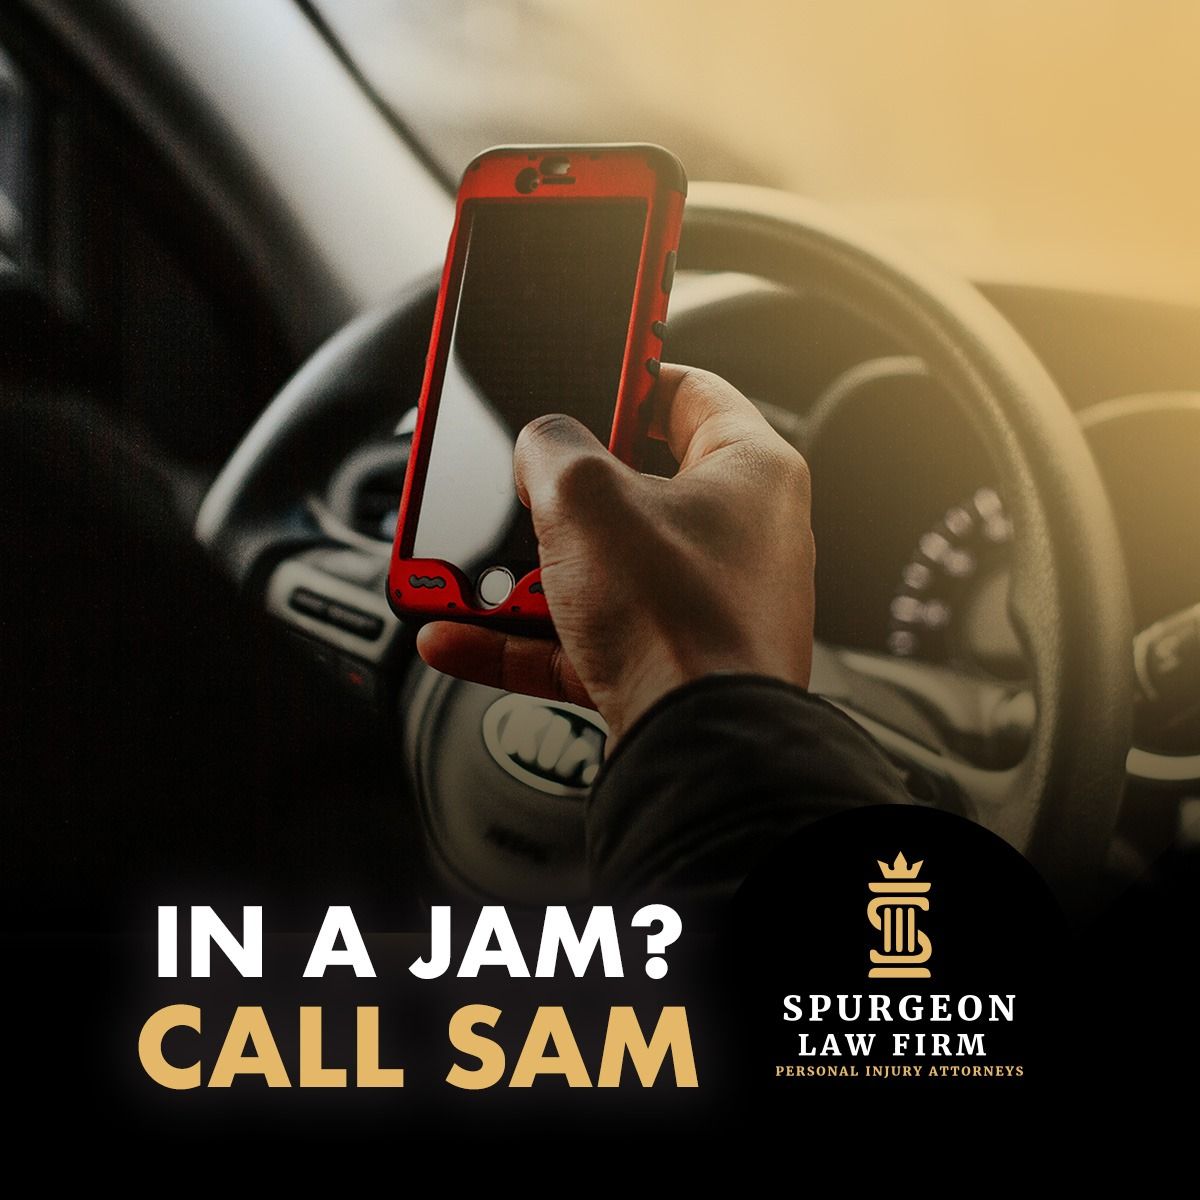 texting and driving personal injury attorney